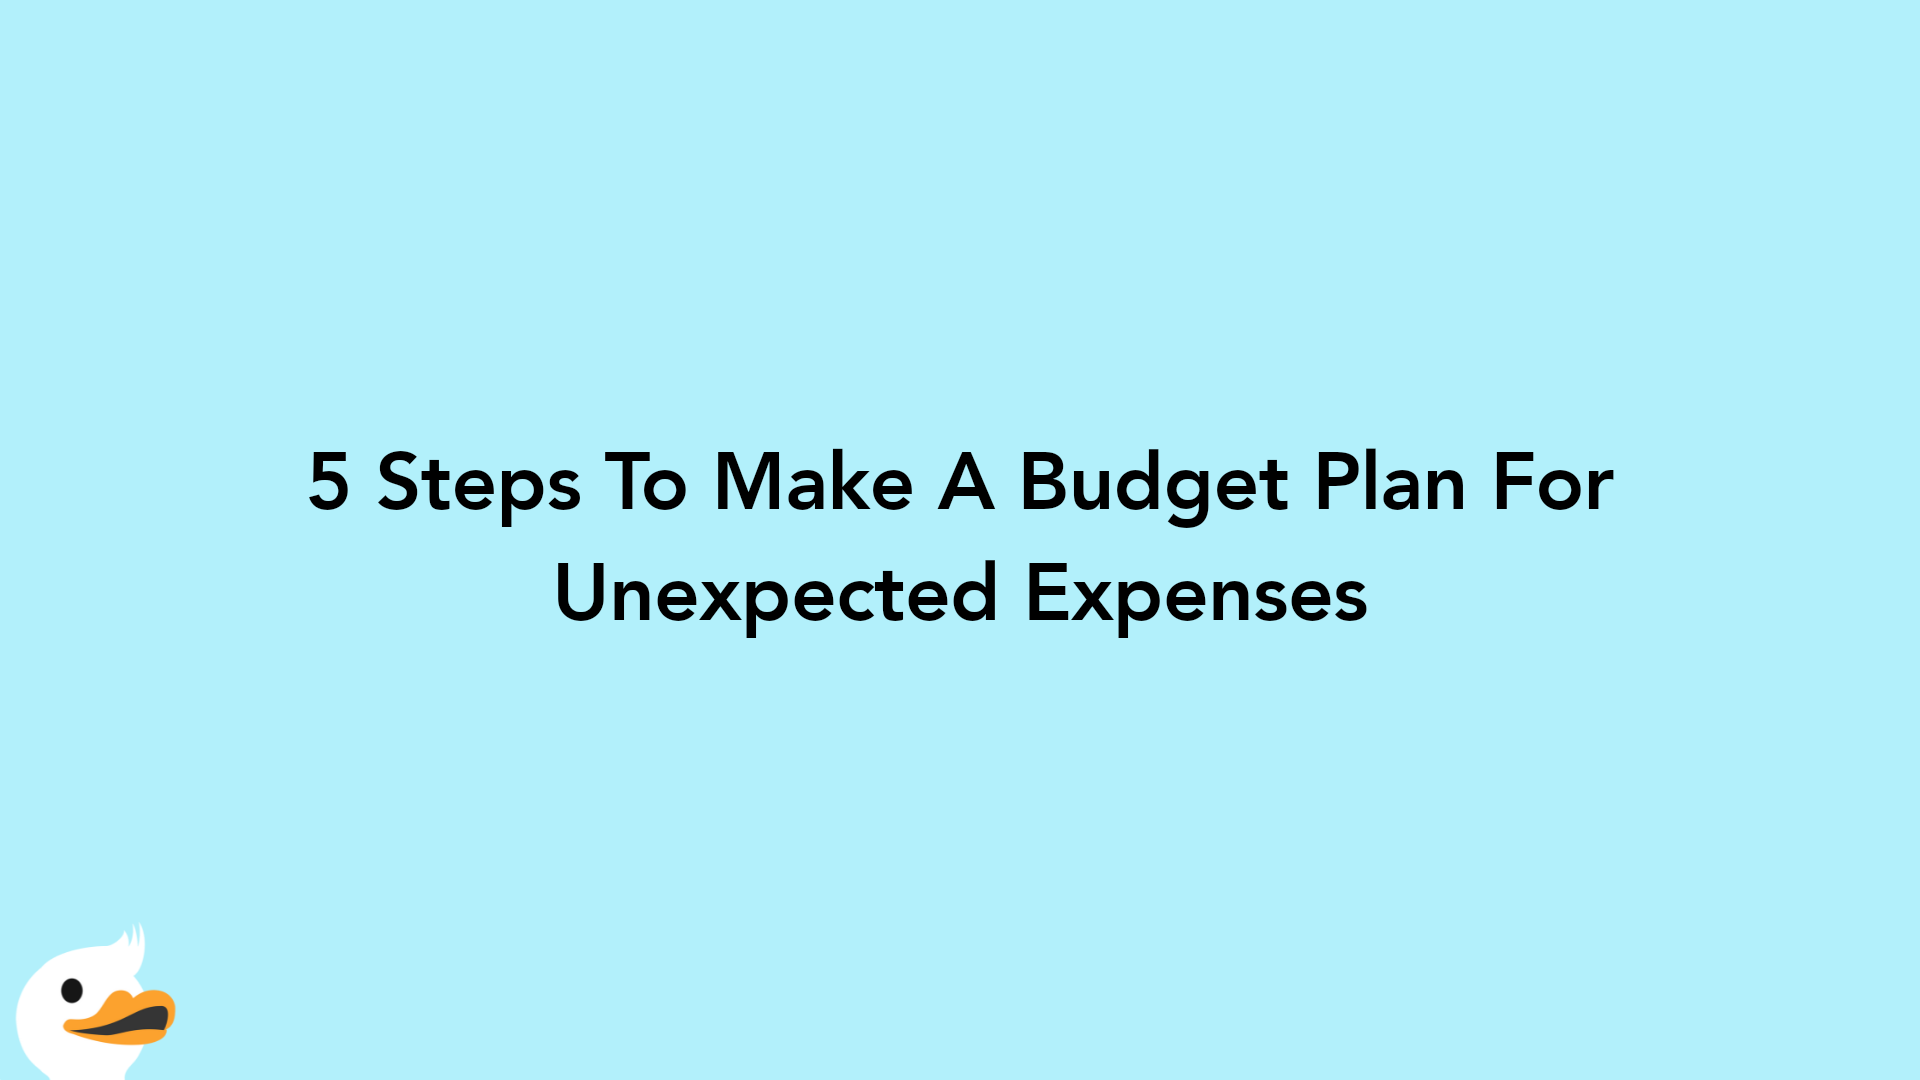 5 Steps To Make A Budget Plan For Unexpected Expenses